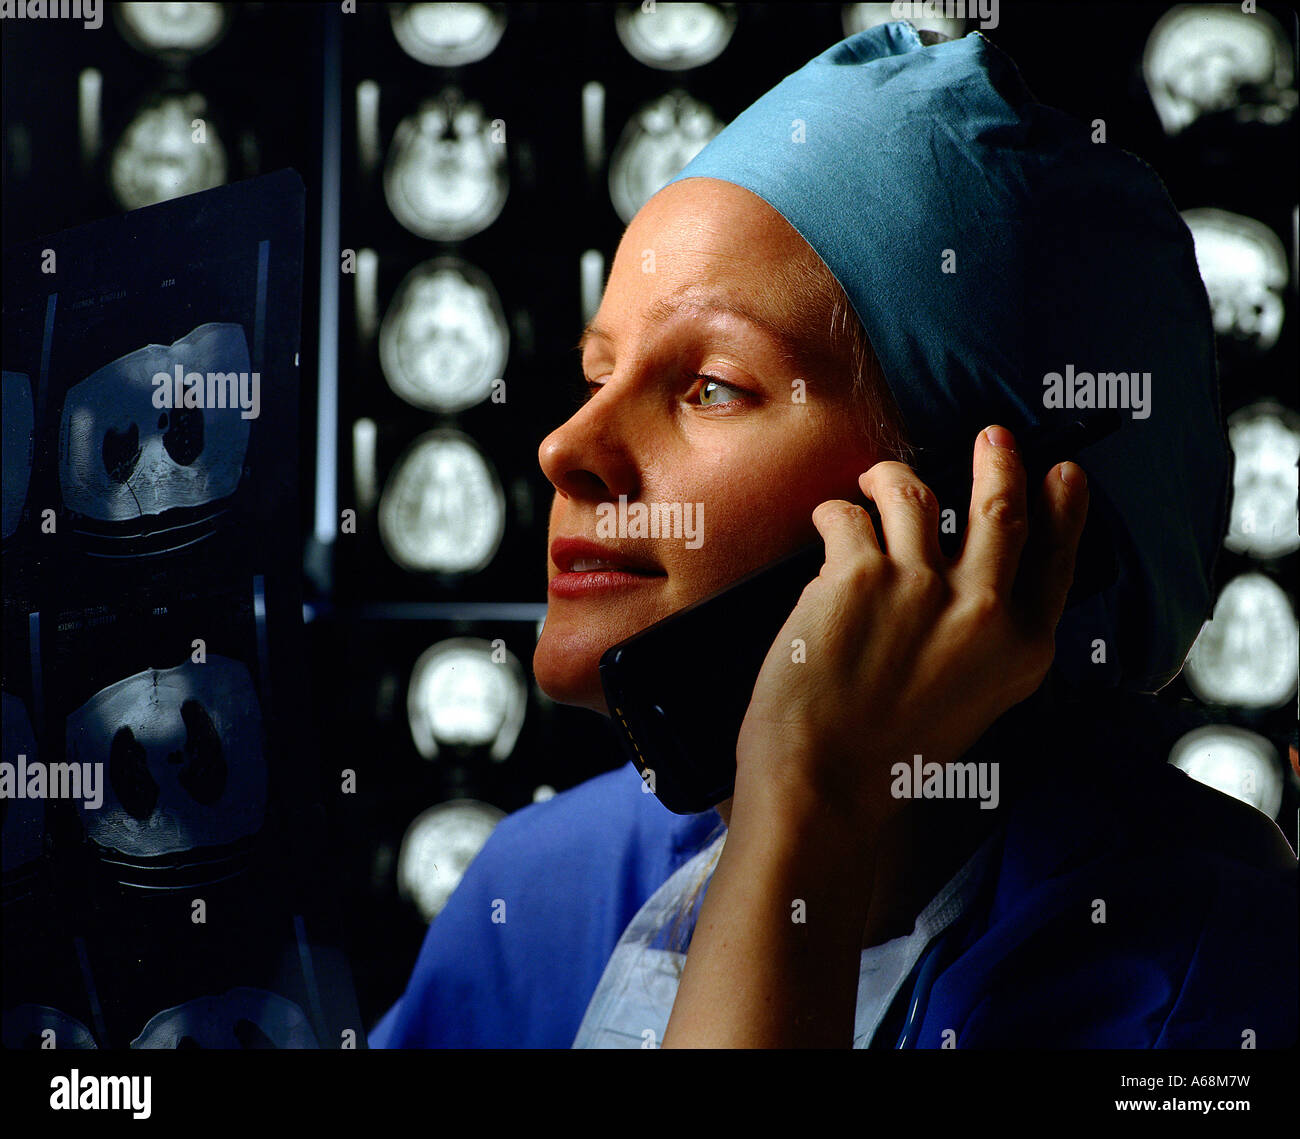 Radiologist on the phone Stock Photo